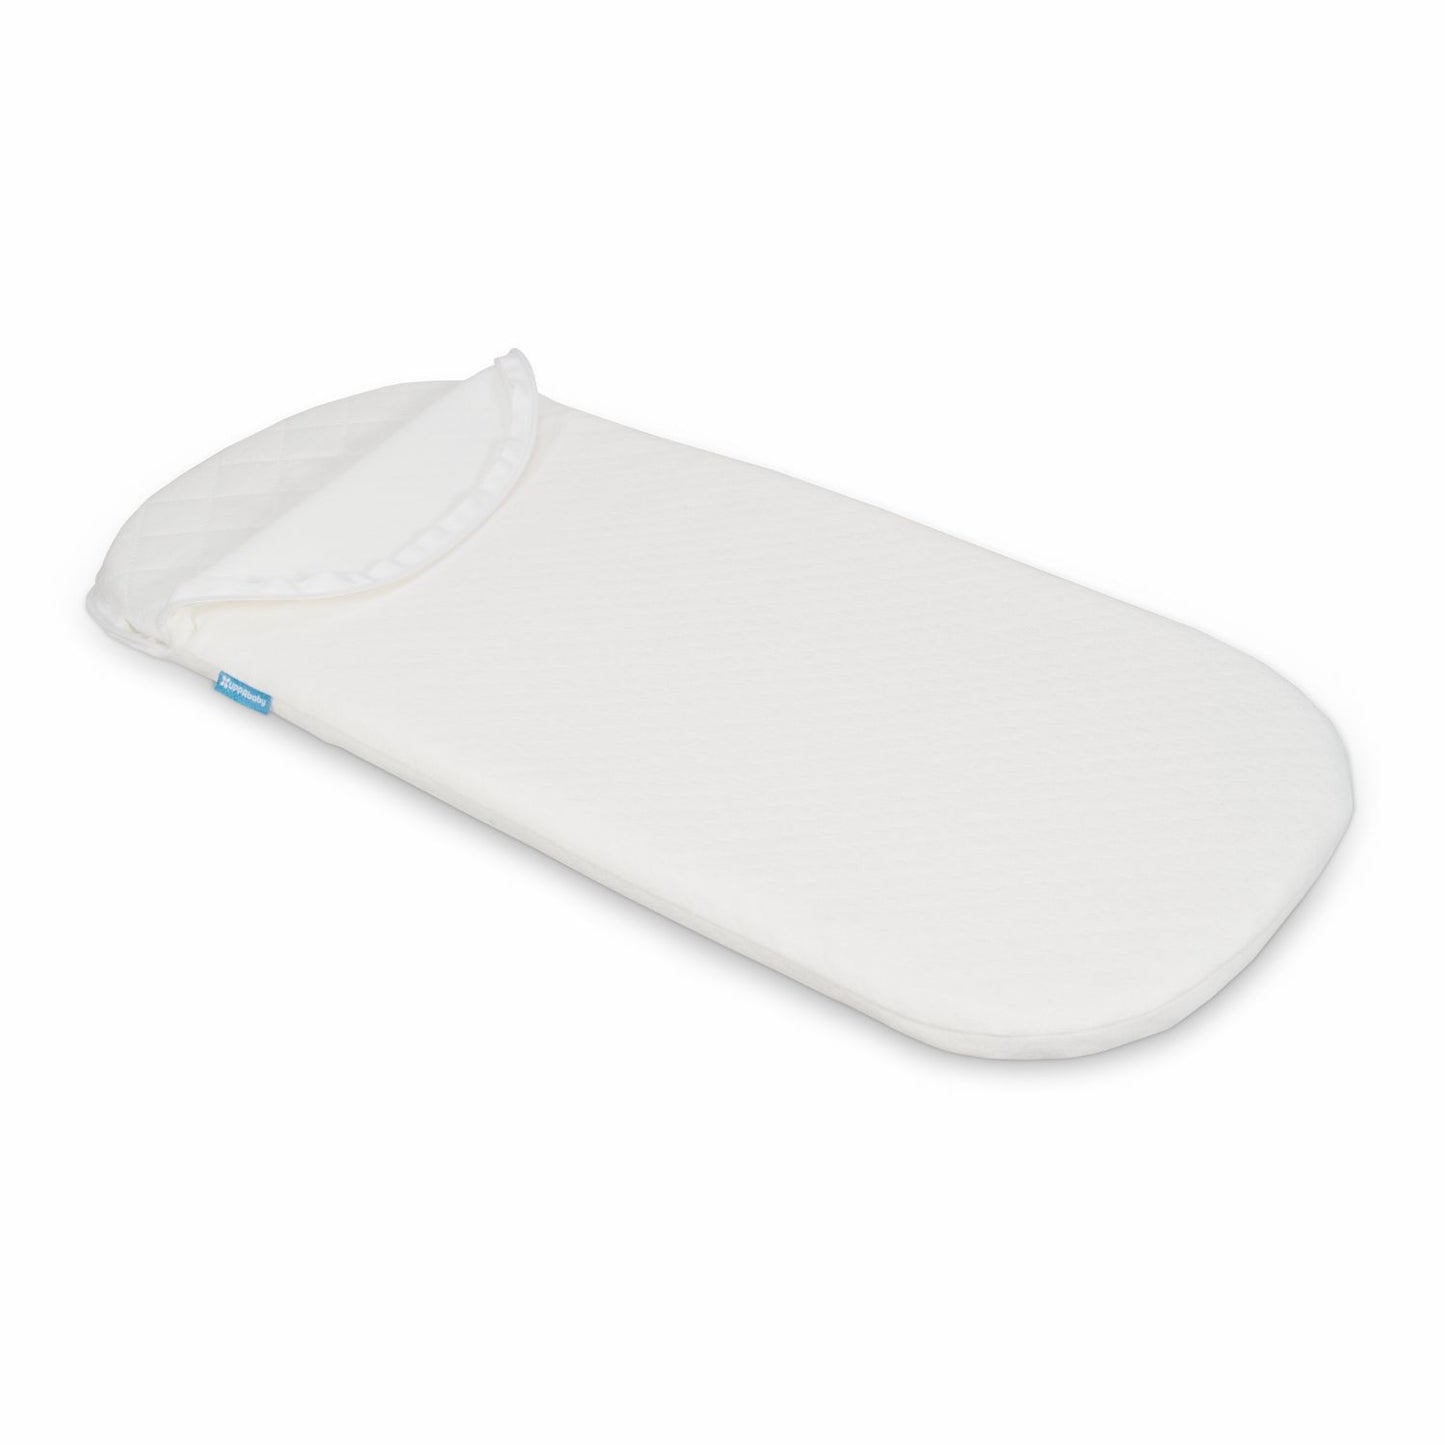 UPPAbaby Bassinet Mattress Cover - White